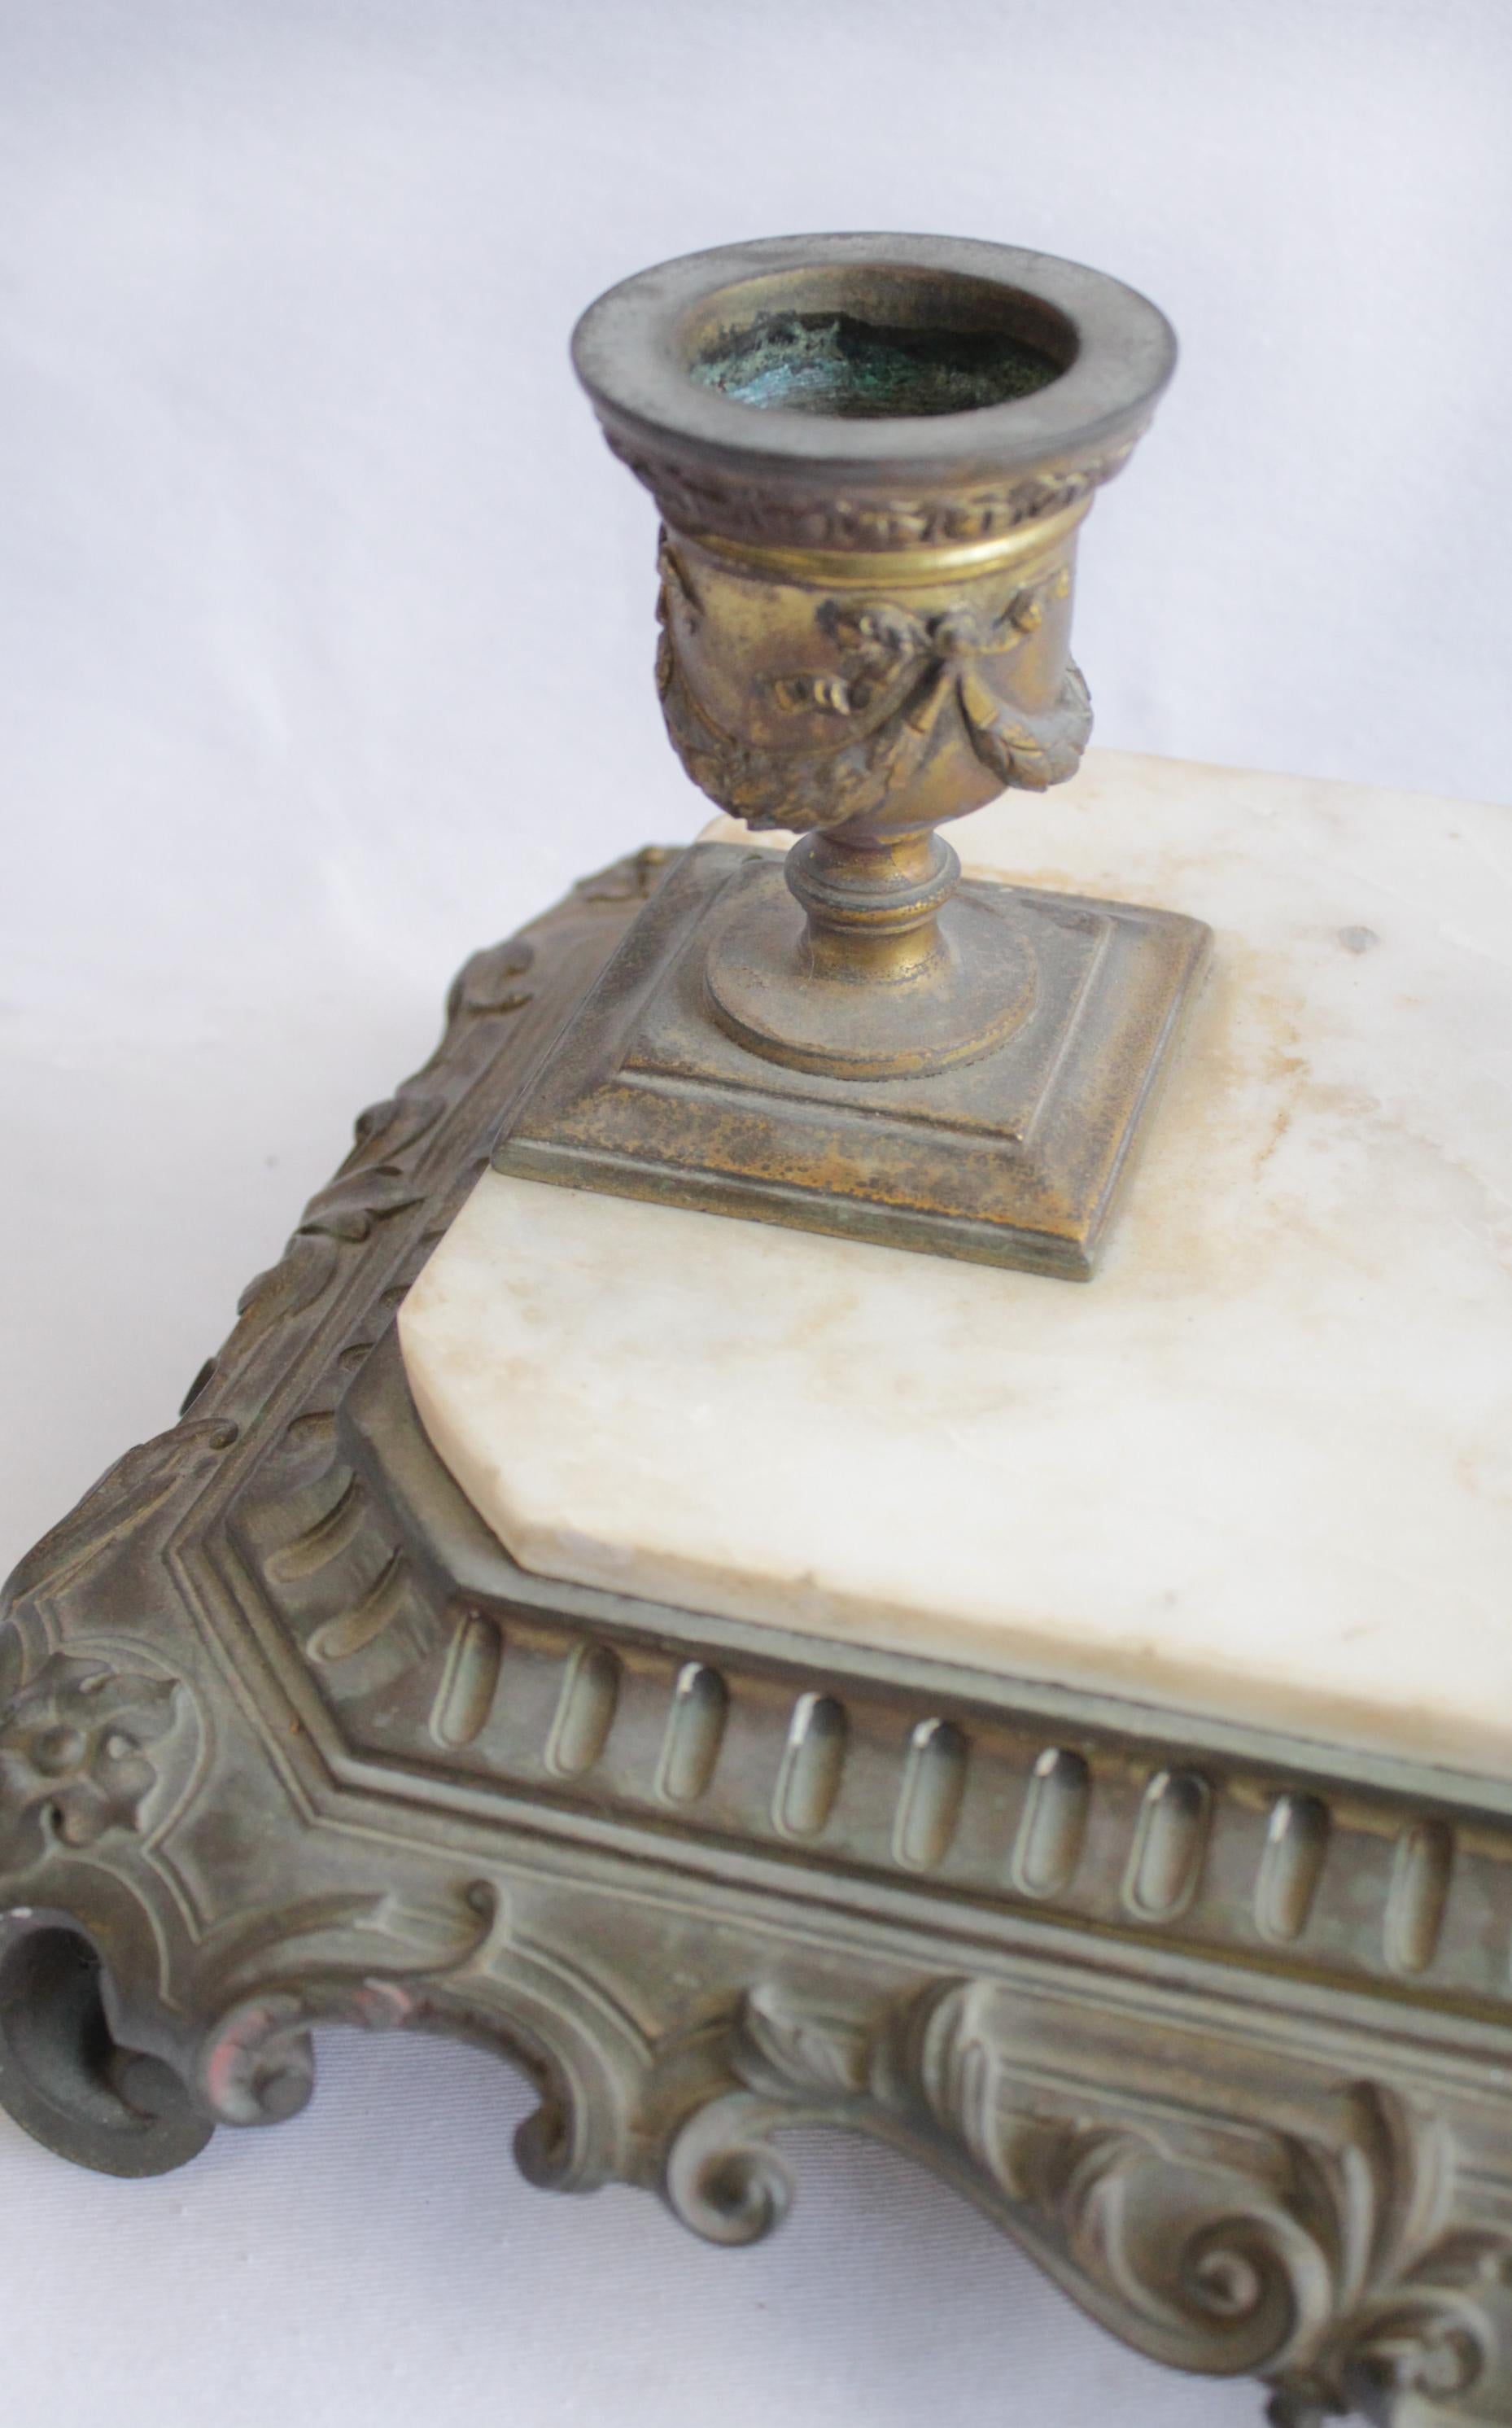 Antique bronze and marble inkwell
Marble is white and grey with some brown coloring. Heavy, beautiful display piece. Bronze has a nice patina.
Measures: 18.5